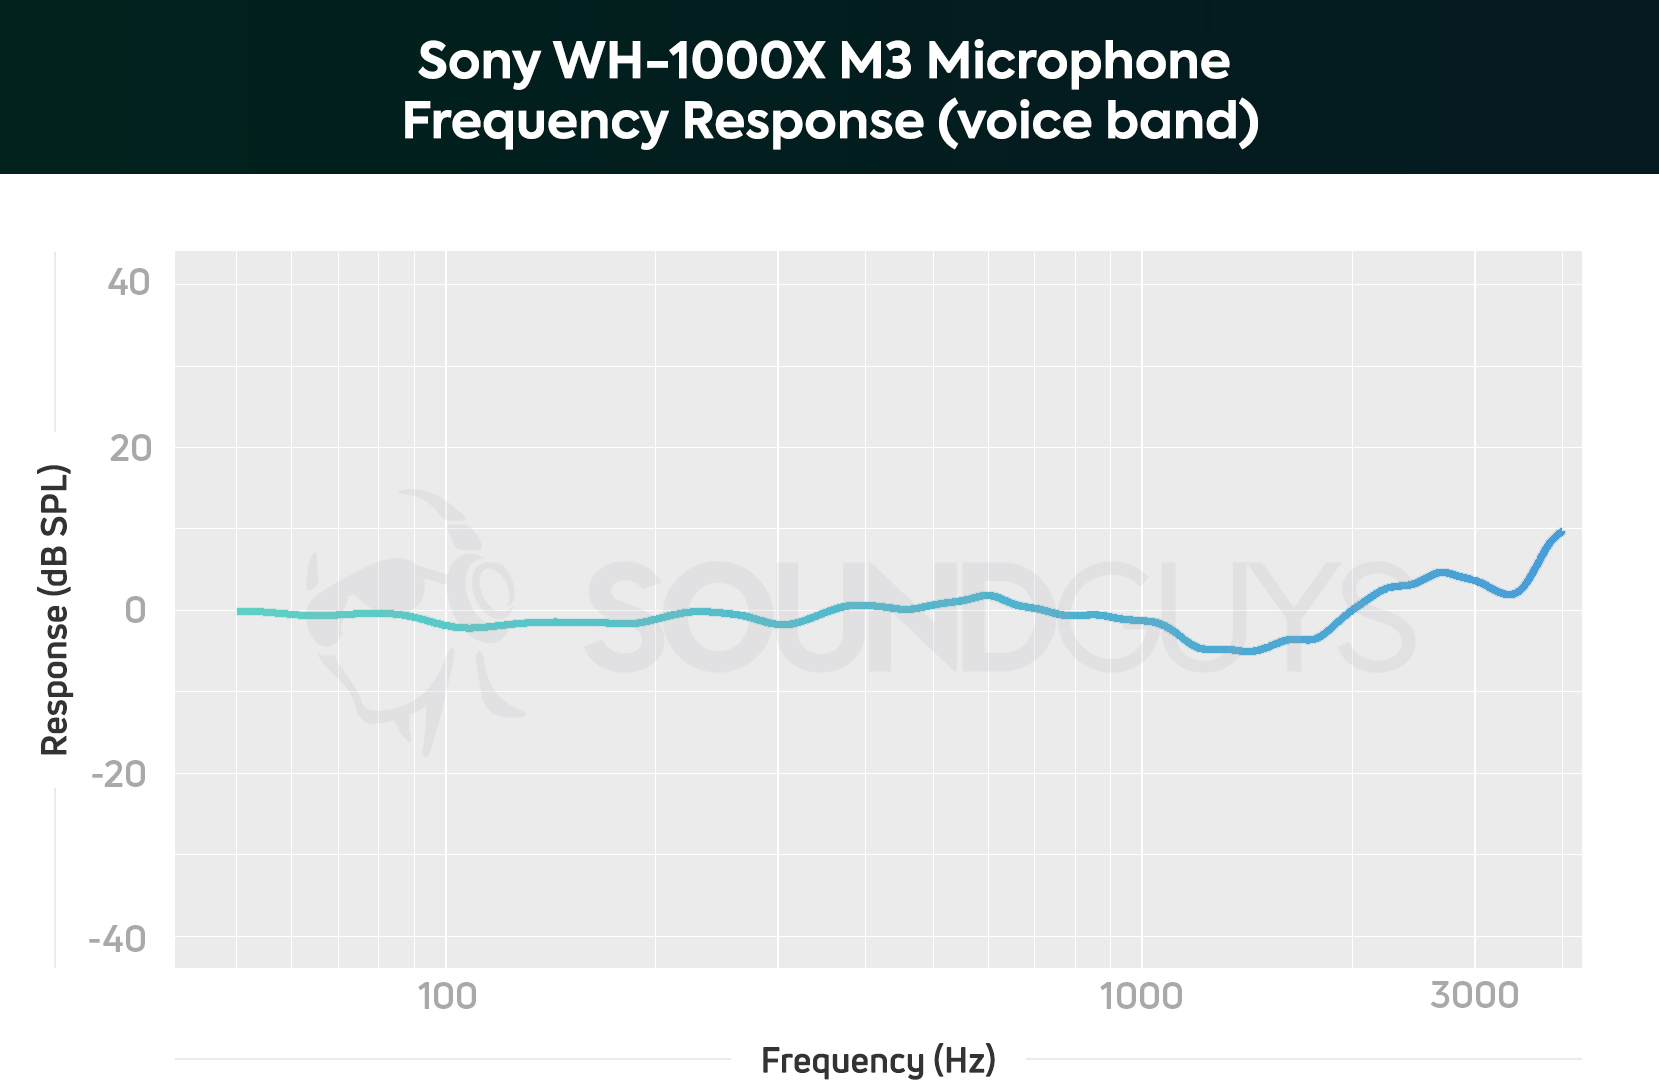 A frequency response chart for the Sony WH-1000XM3's microphone performance in the voice range.